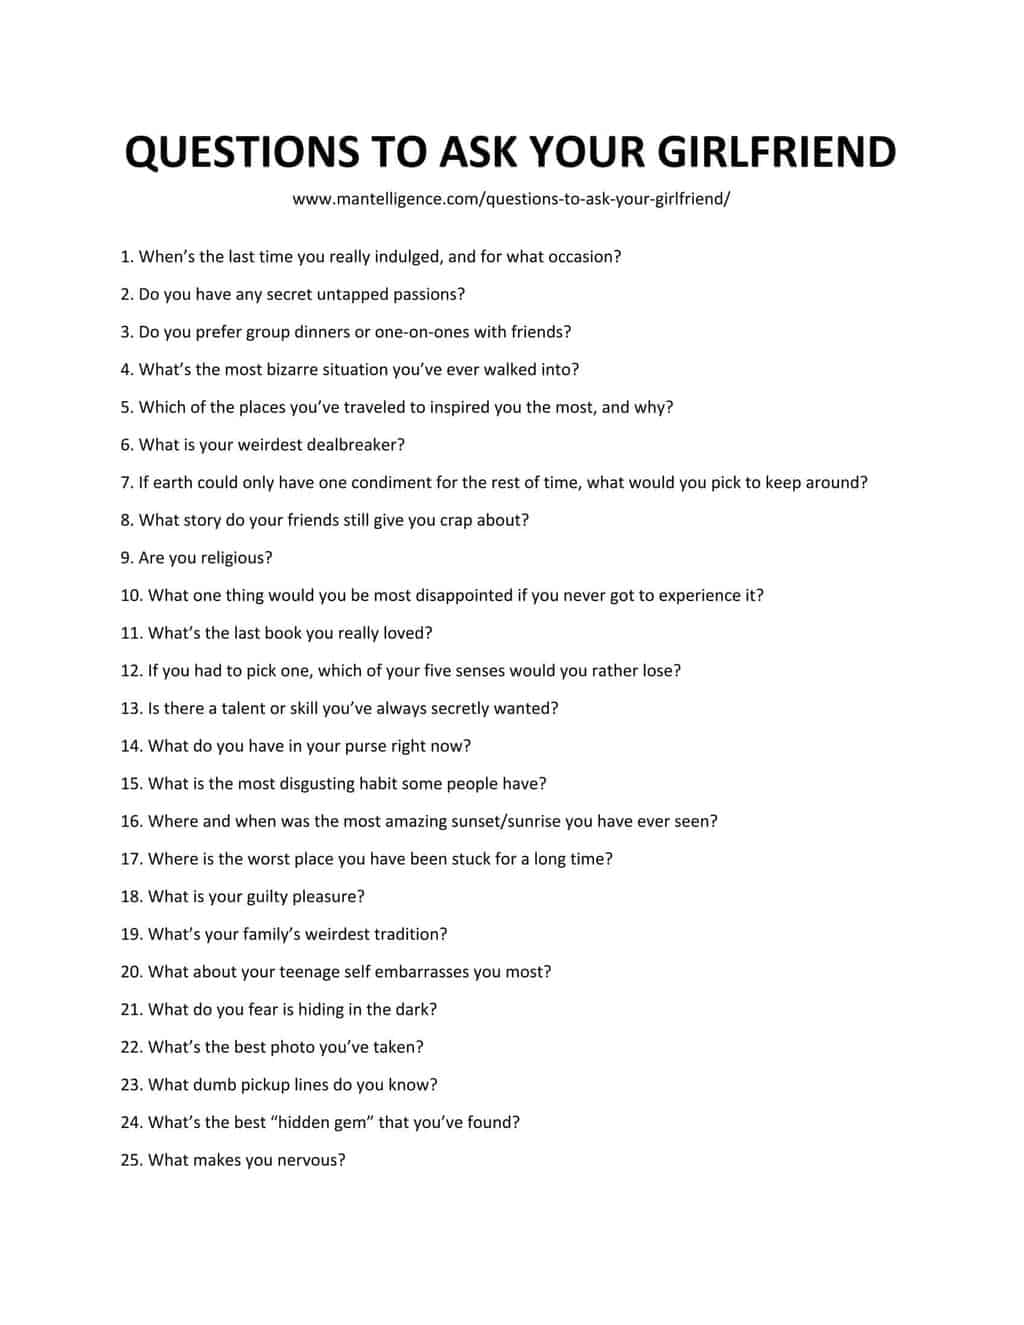 List of Questions To Ask Your Girlfriend